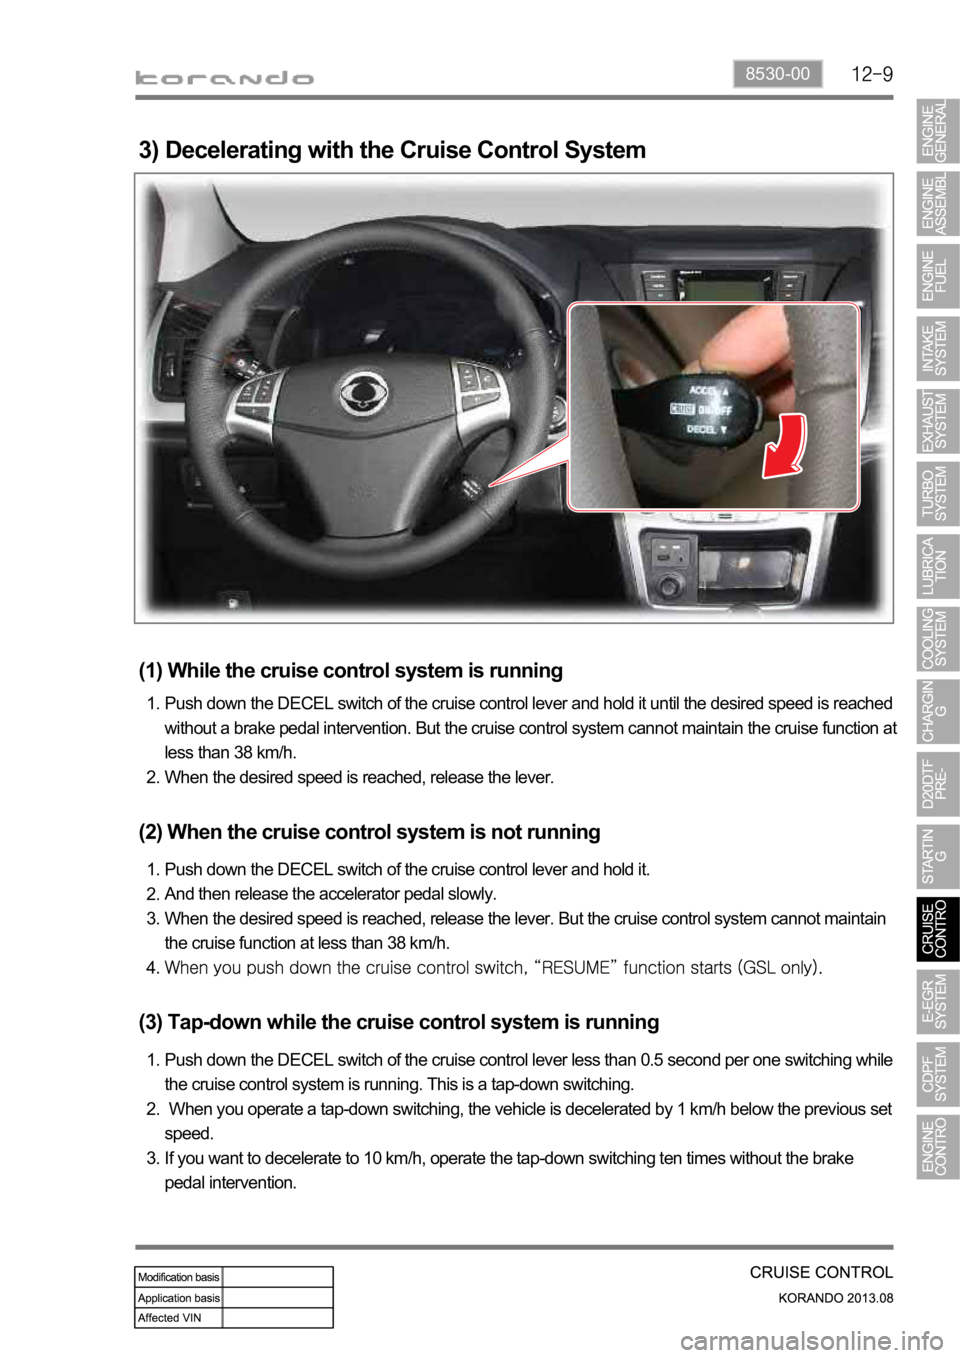 SSANGYONG KORANDO 2013  Service Manual 8530-00
3) Decelerating with the Cruise Control System
(1) While the cruise control system is running
Push down the DECEL switch of the cruise control lever and hold it until the desired speed is reac